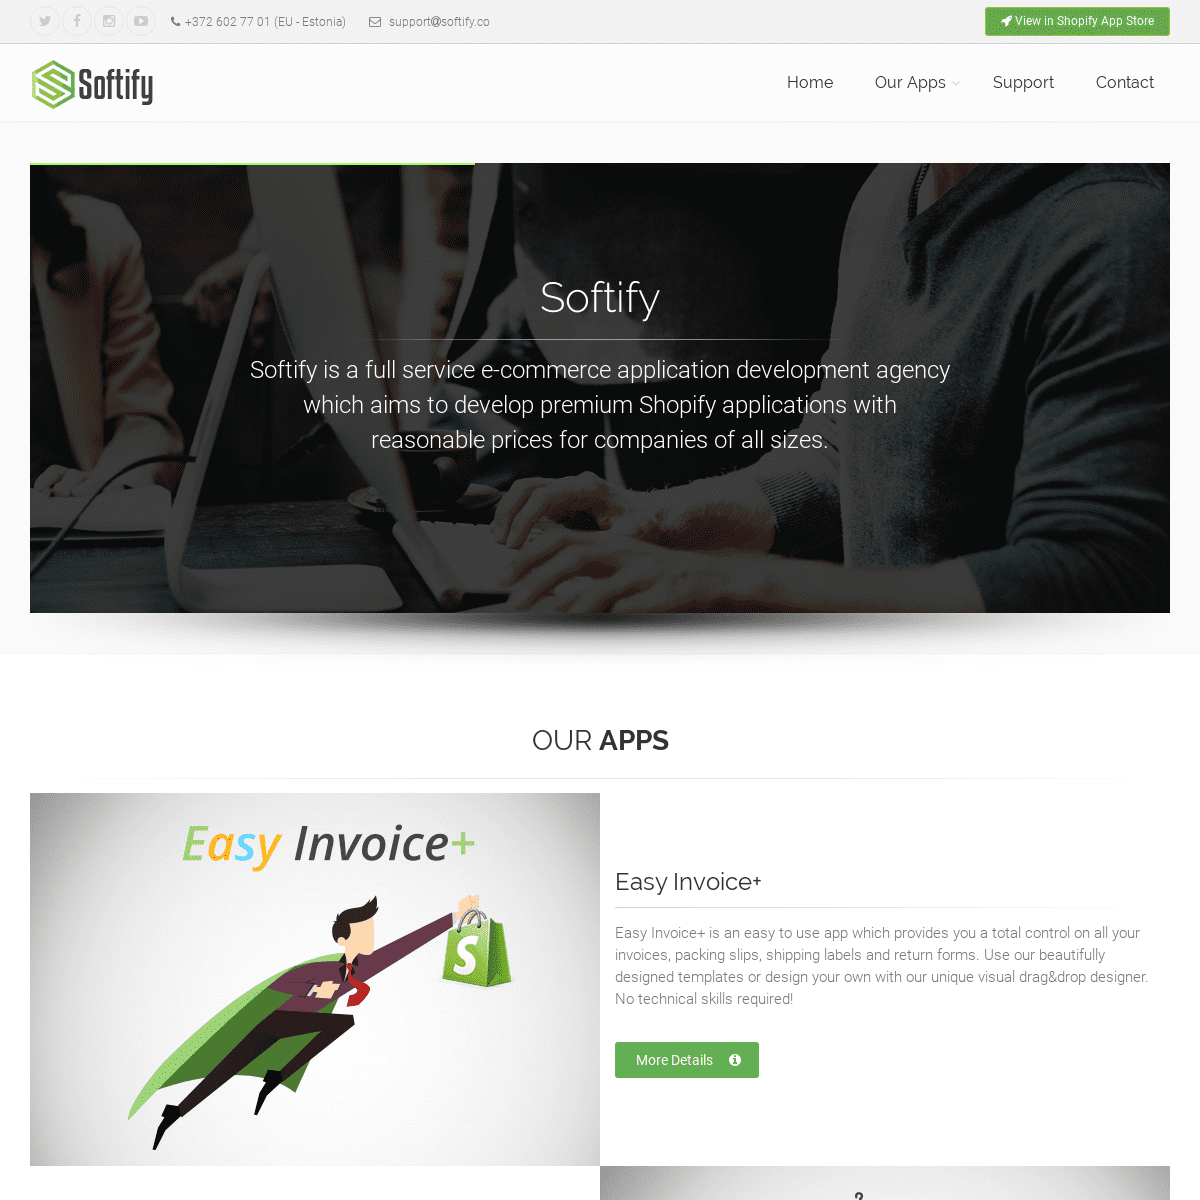 A complete backup of softify.co